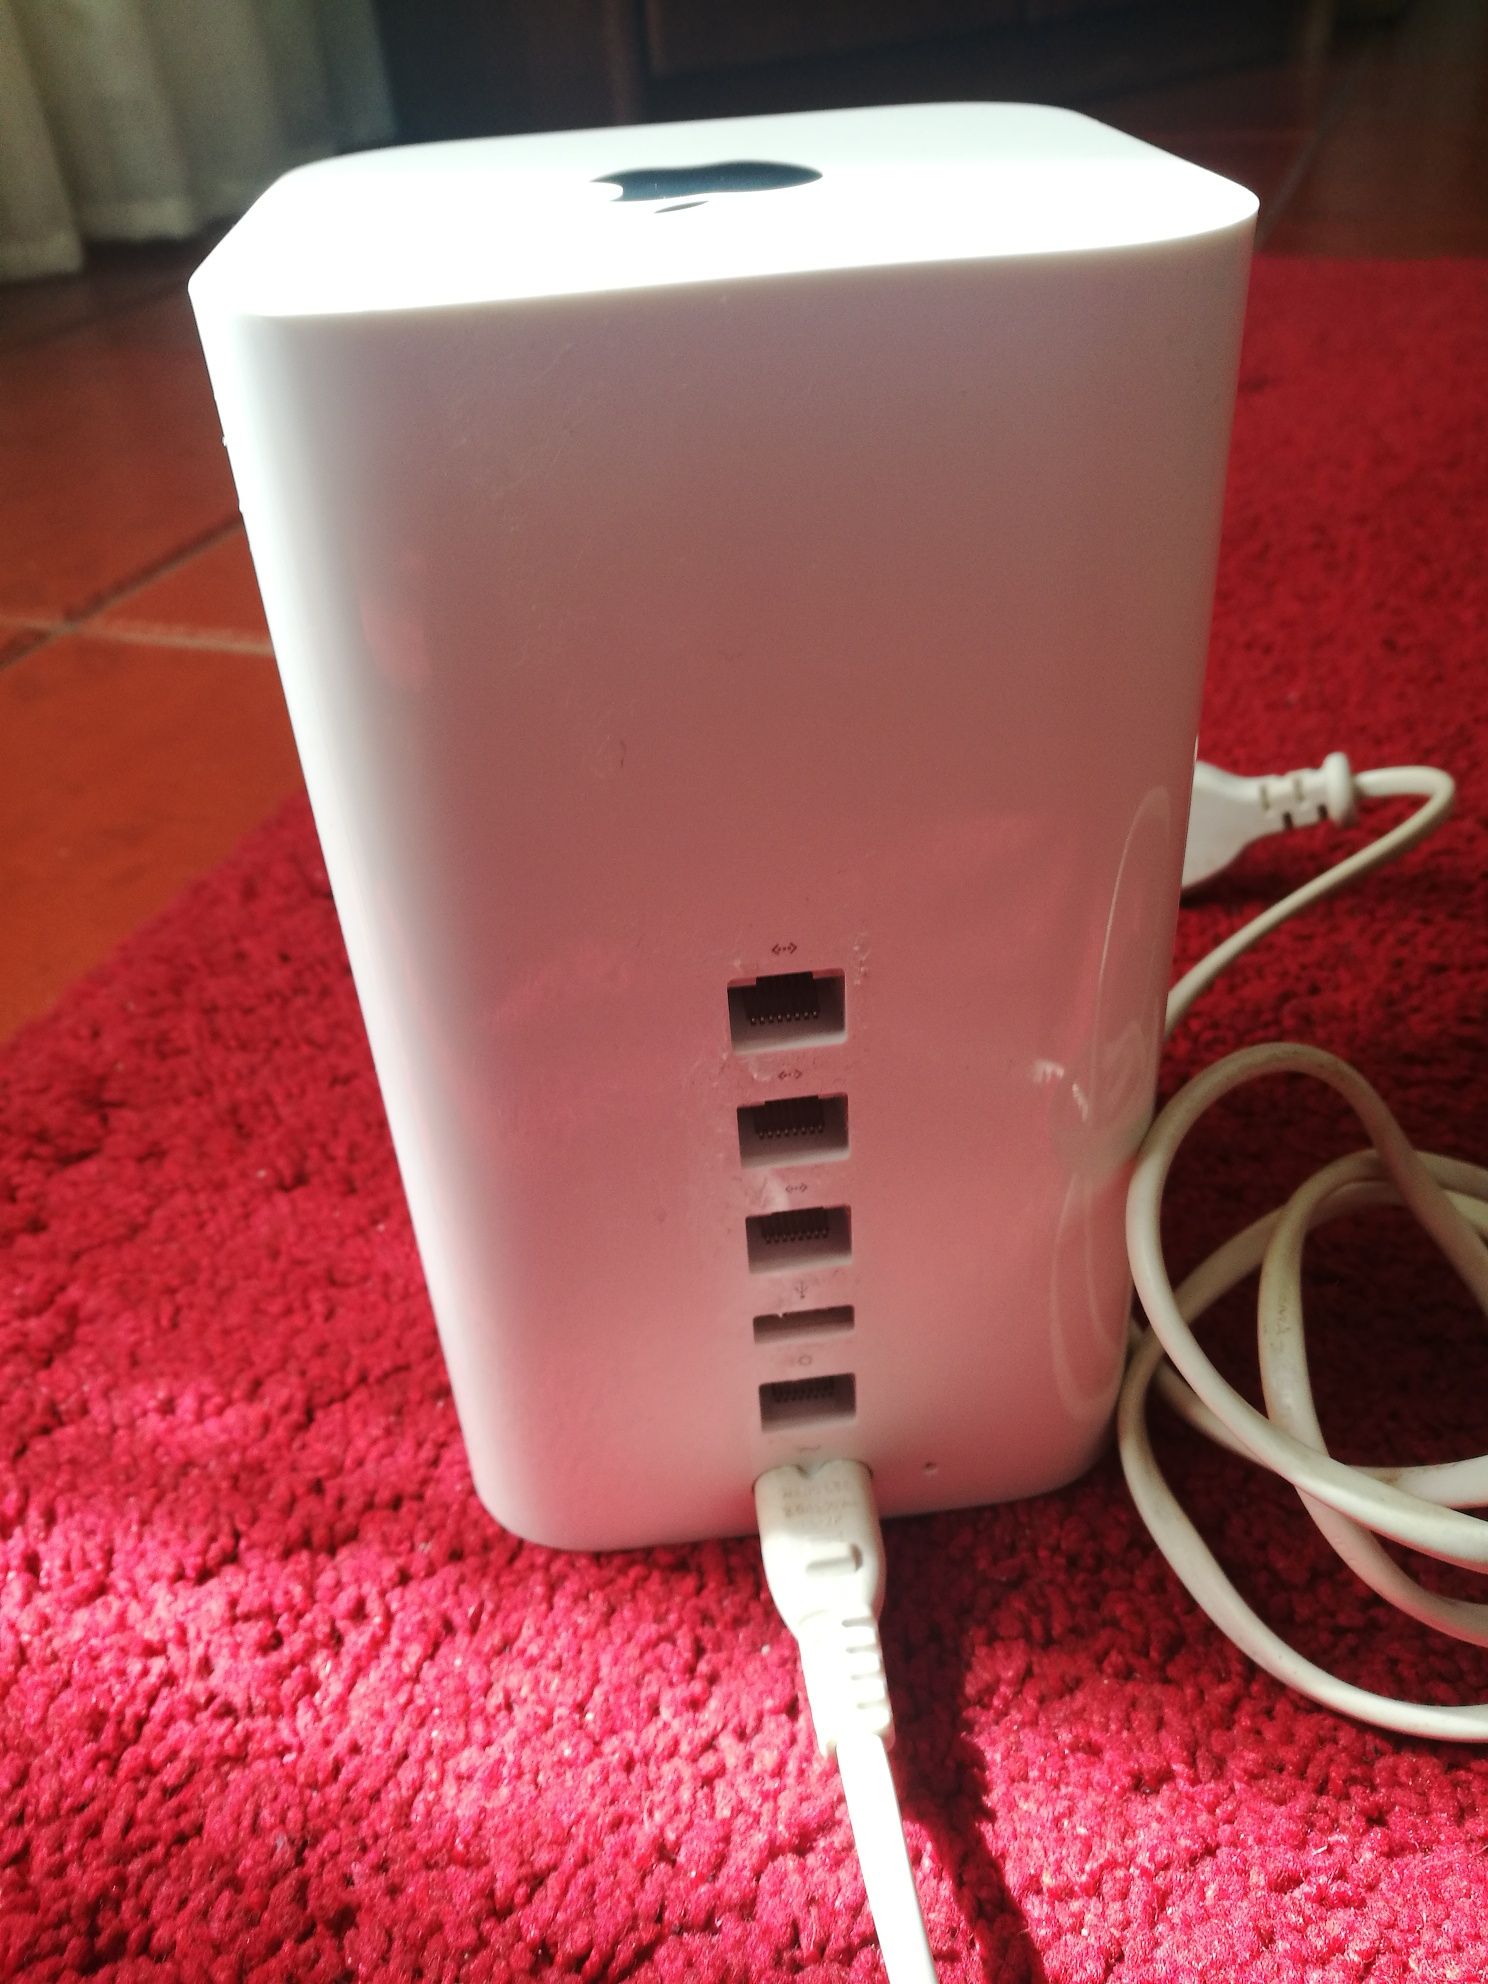 Apple Airport extreme base